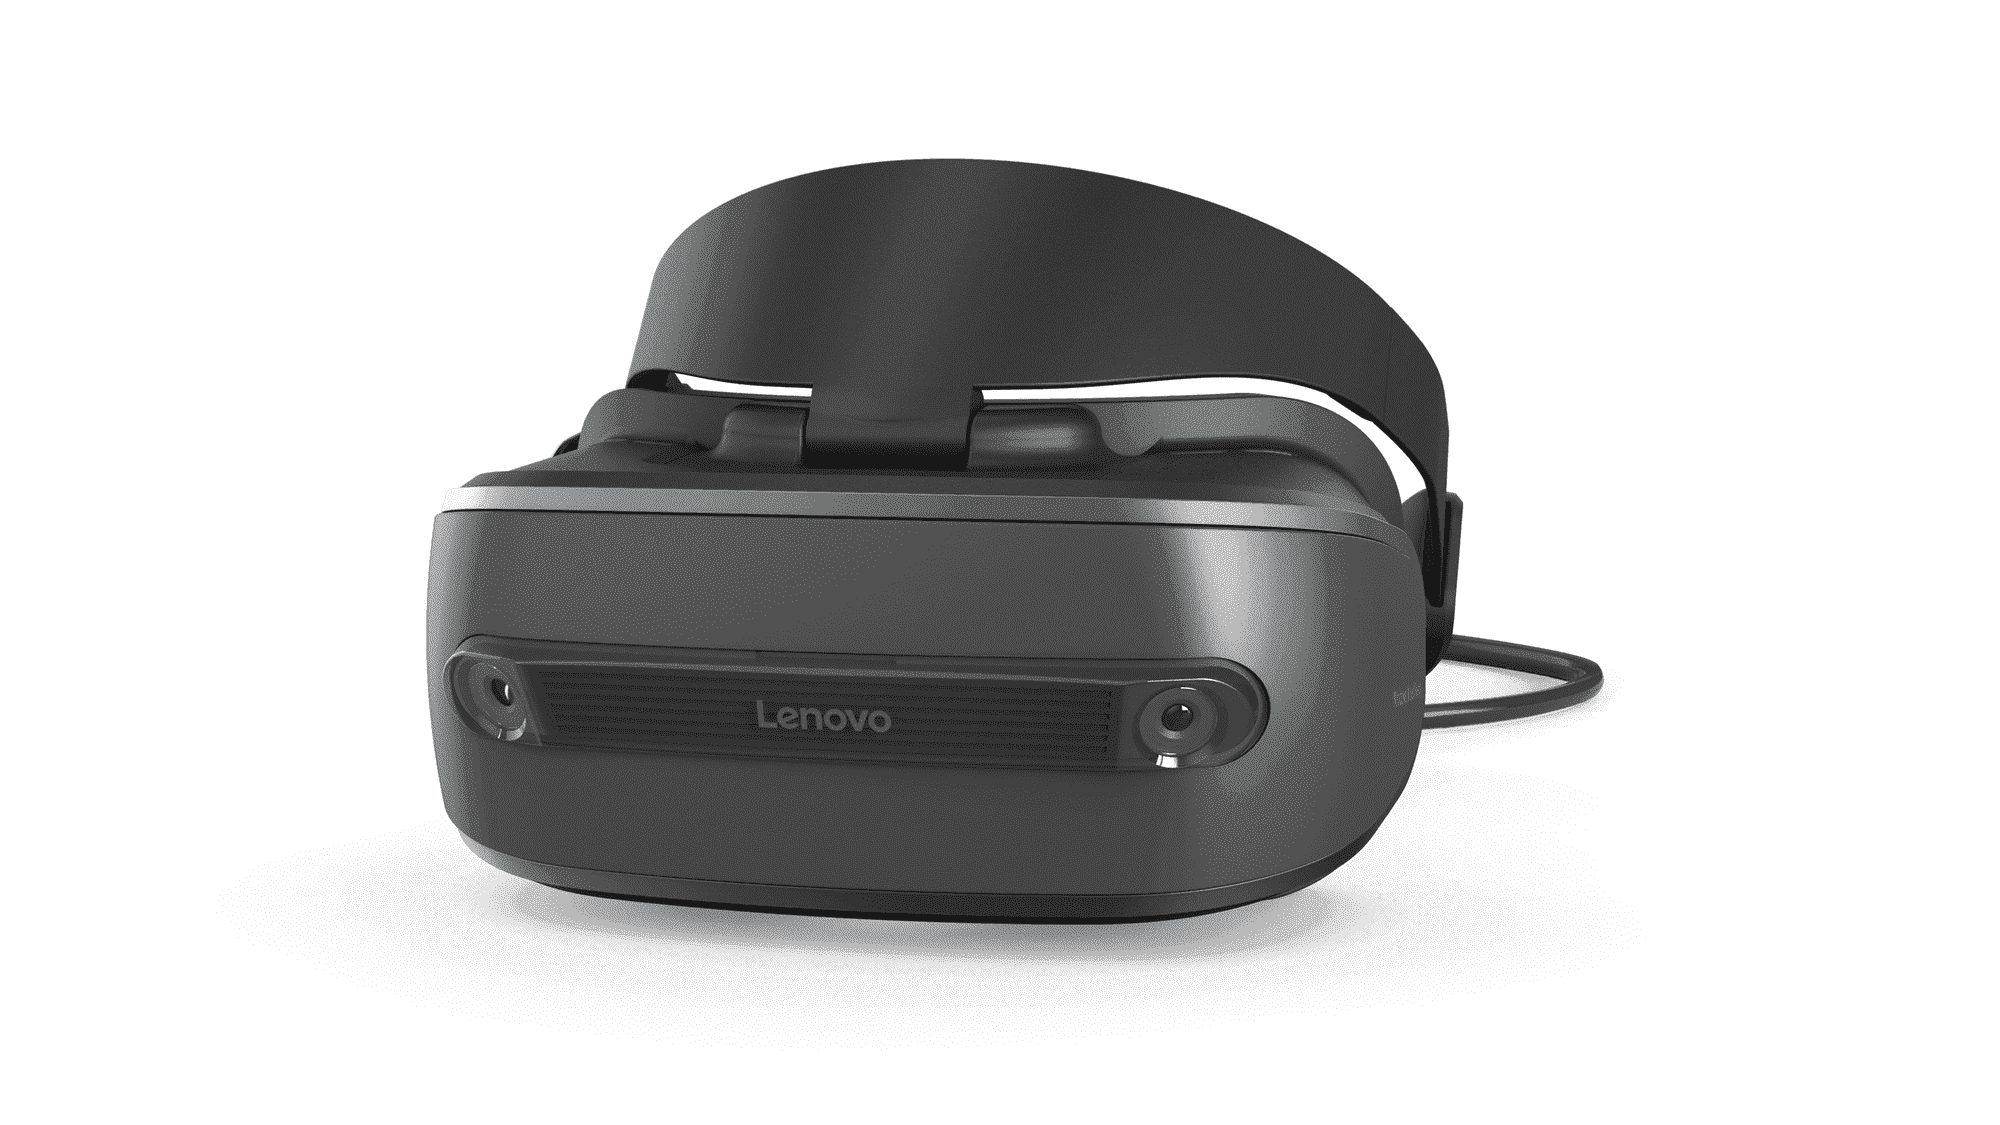 Samsung HMD Odyssey+ Windows Mixed Reality headset spotted online 1a4459ebcd24af25550220425d322628.png